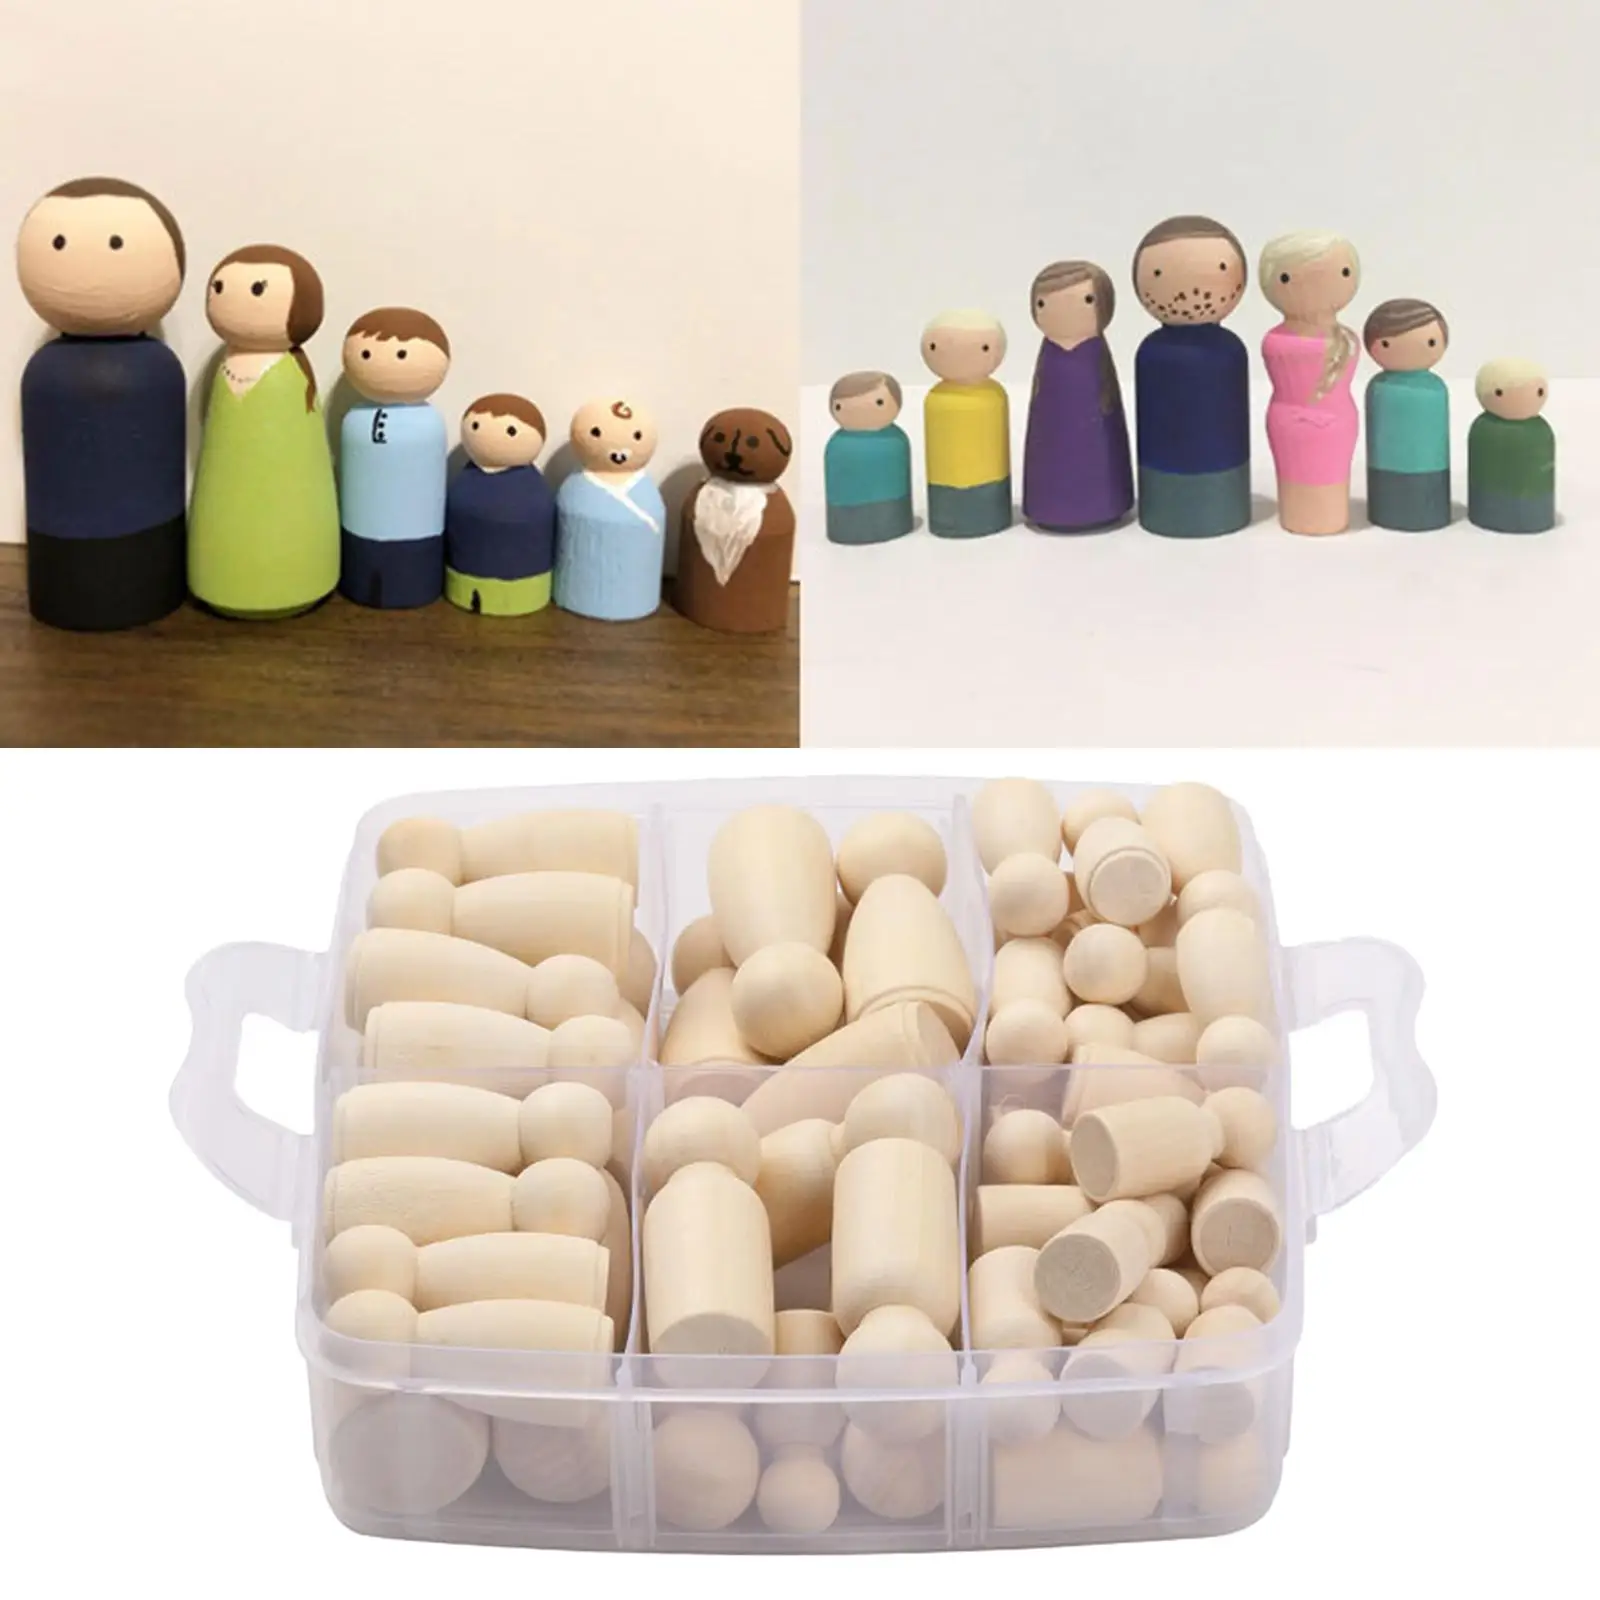 50pcs/set Smooth Blank Peg Doll People Shapes Wooden DIY Figures Ornament Crafting Making Dolls with Storage Case 